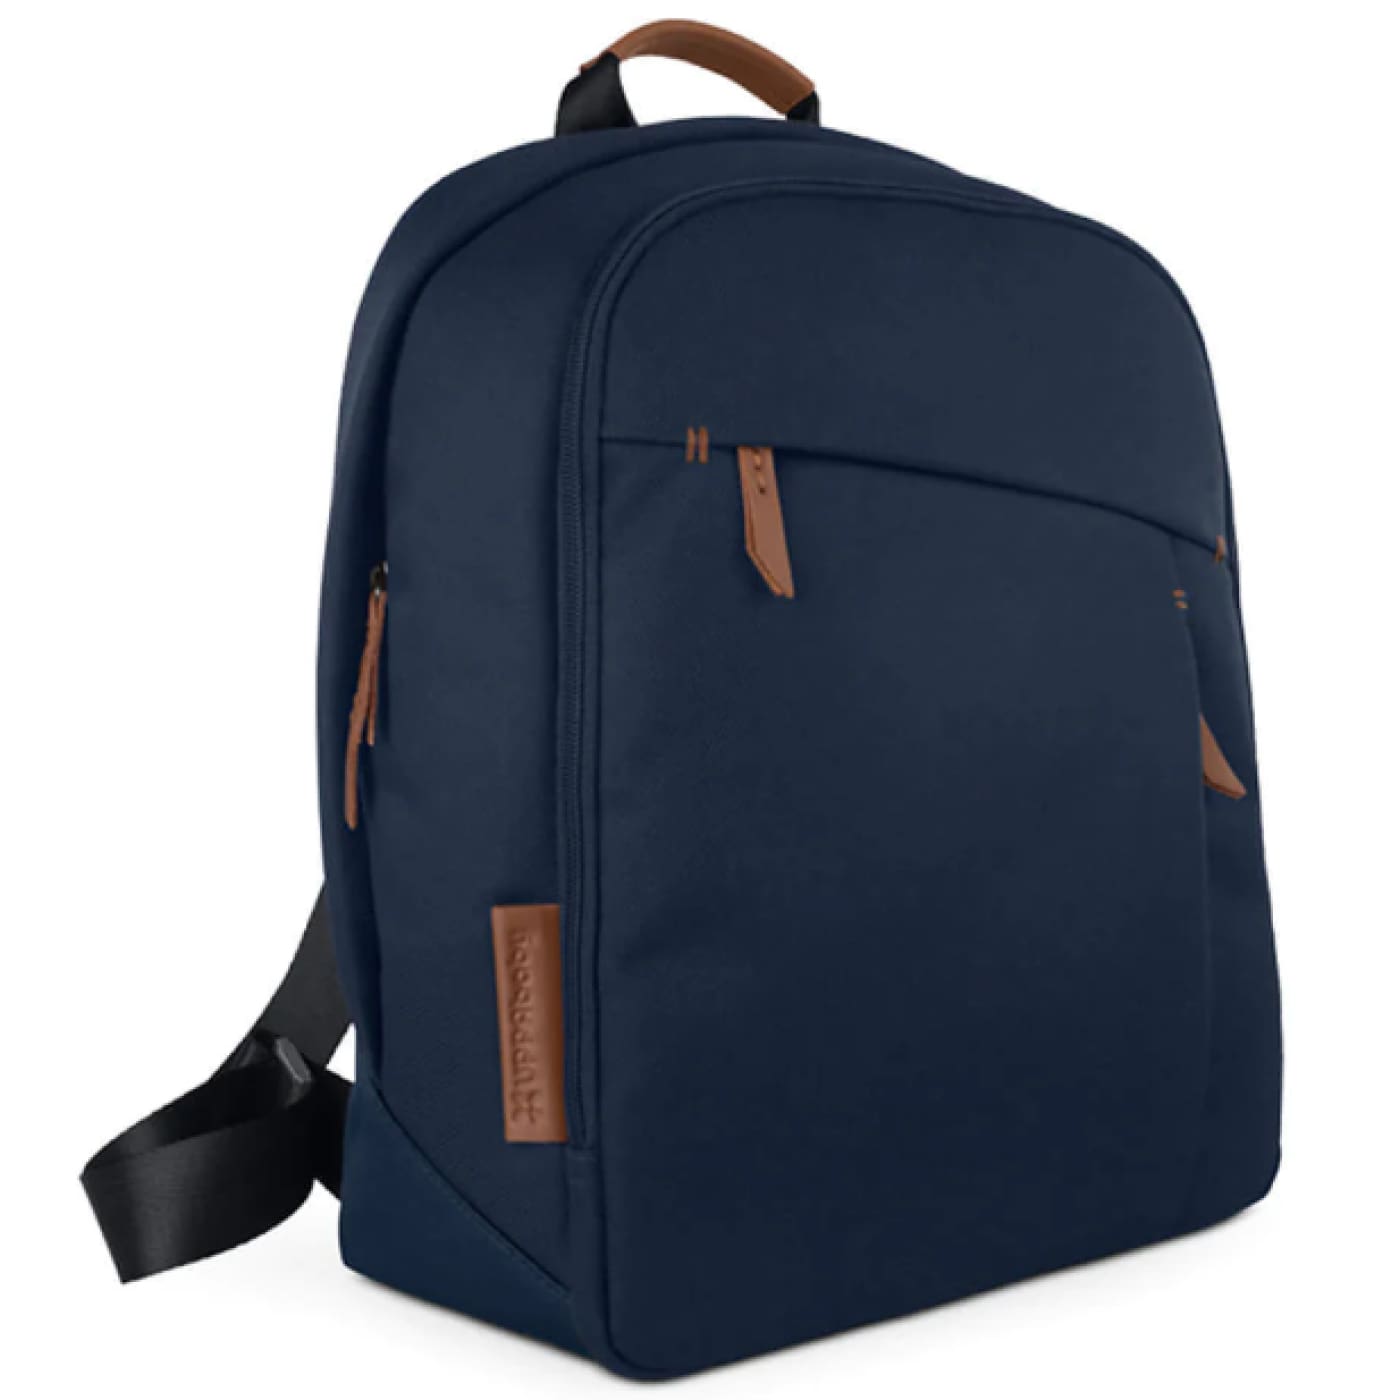 UPPAbaby Changing Backpack - Noa (Navy) - Noa - ON THE GO - NAPPY BAGS/LUGGAGE